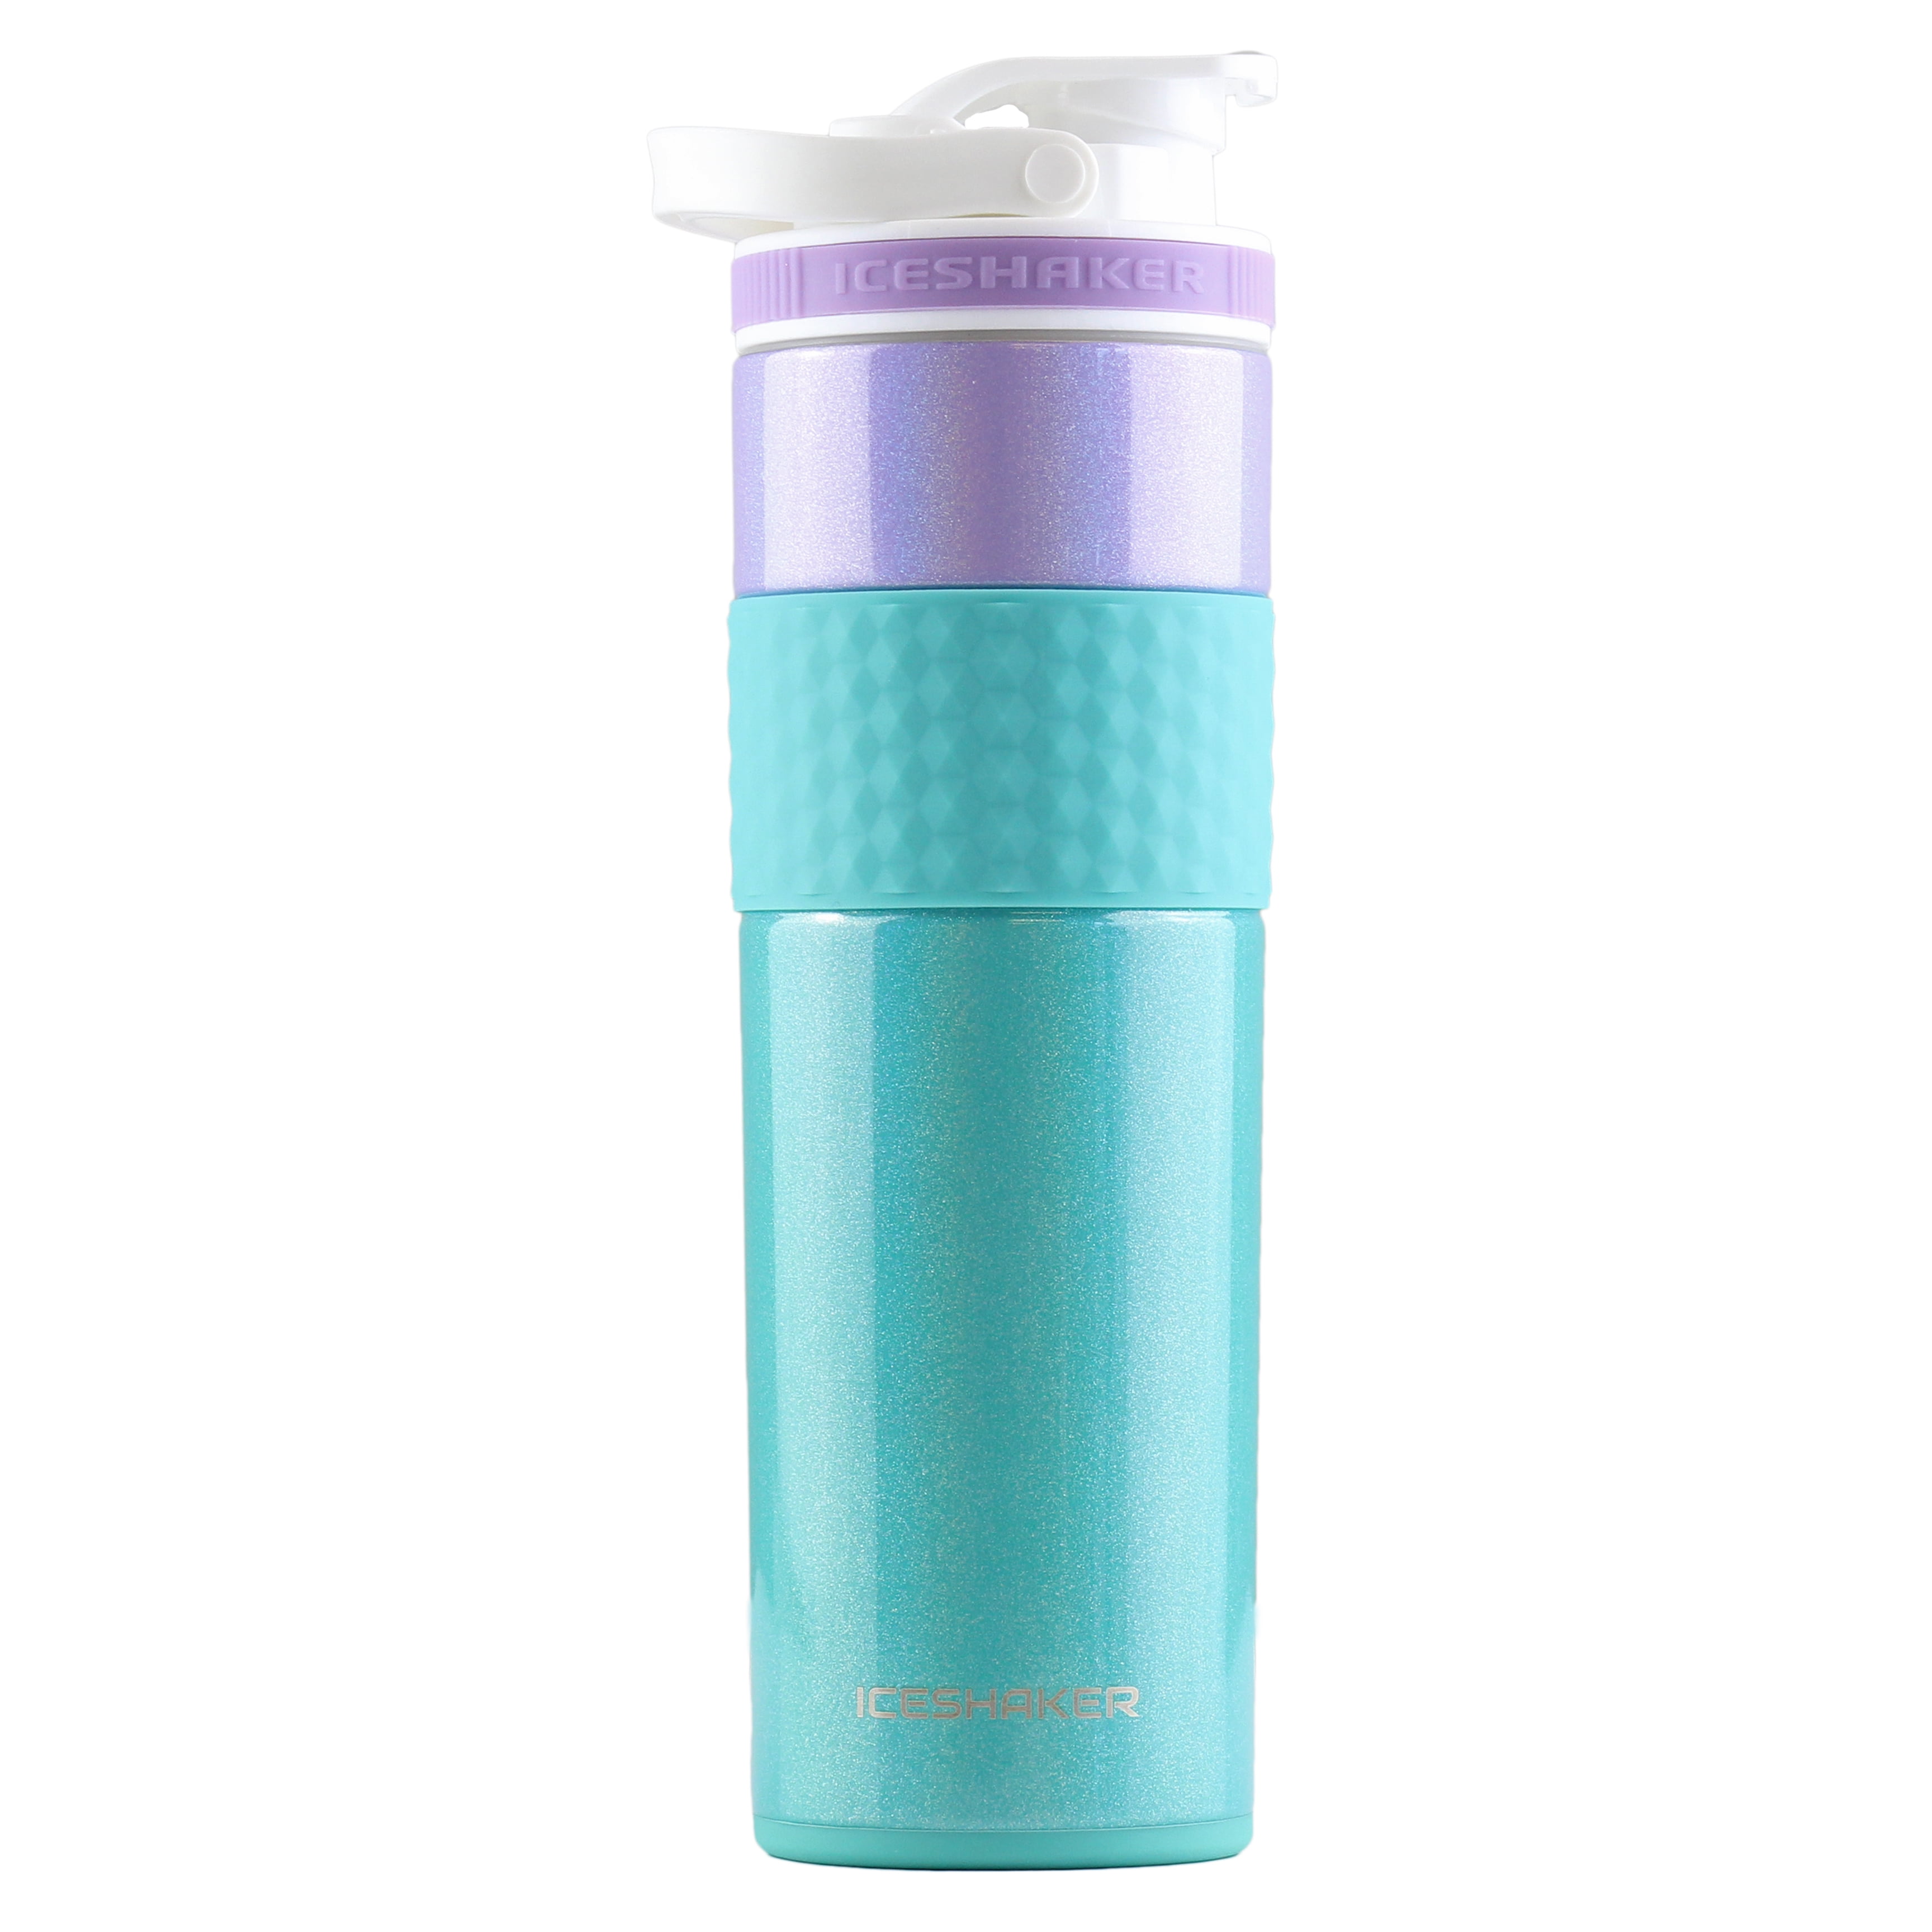 Ice Shaker Double Walled Vacuum Insulated, Skinny Protein Shaker Bottle, Purple & Teal, 20 oz.